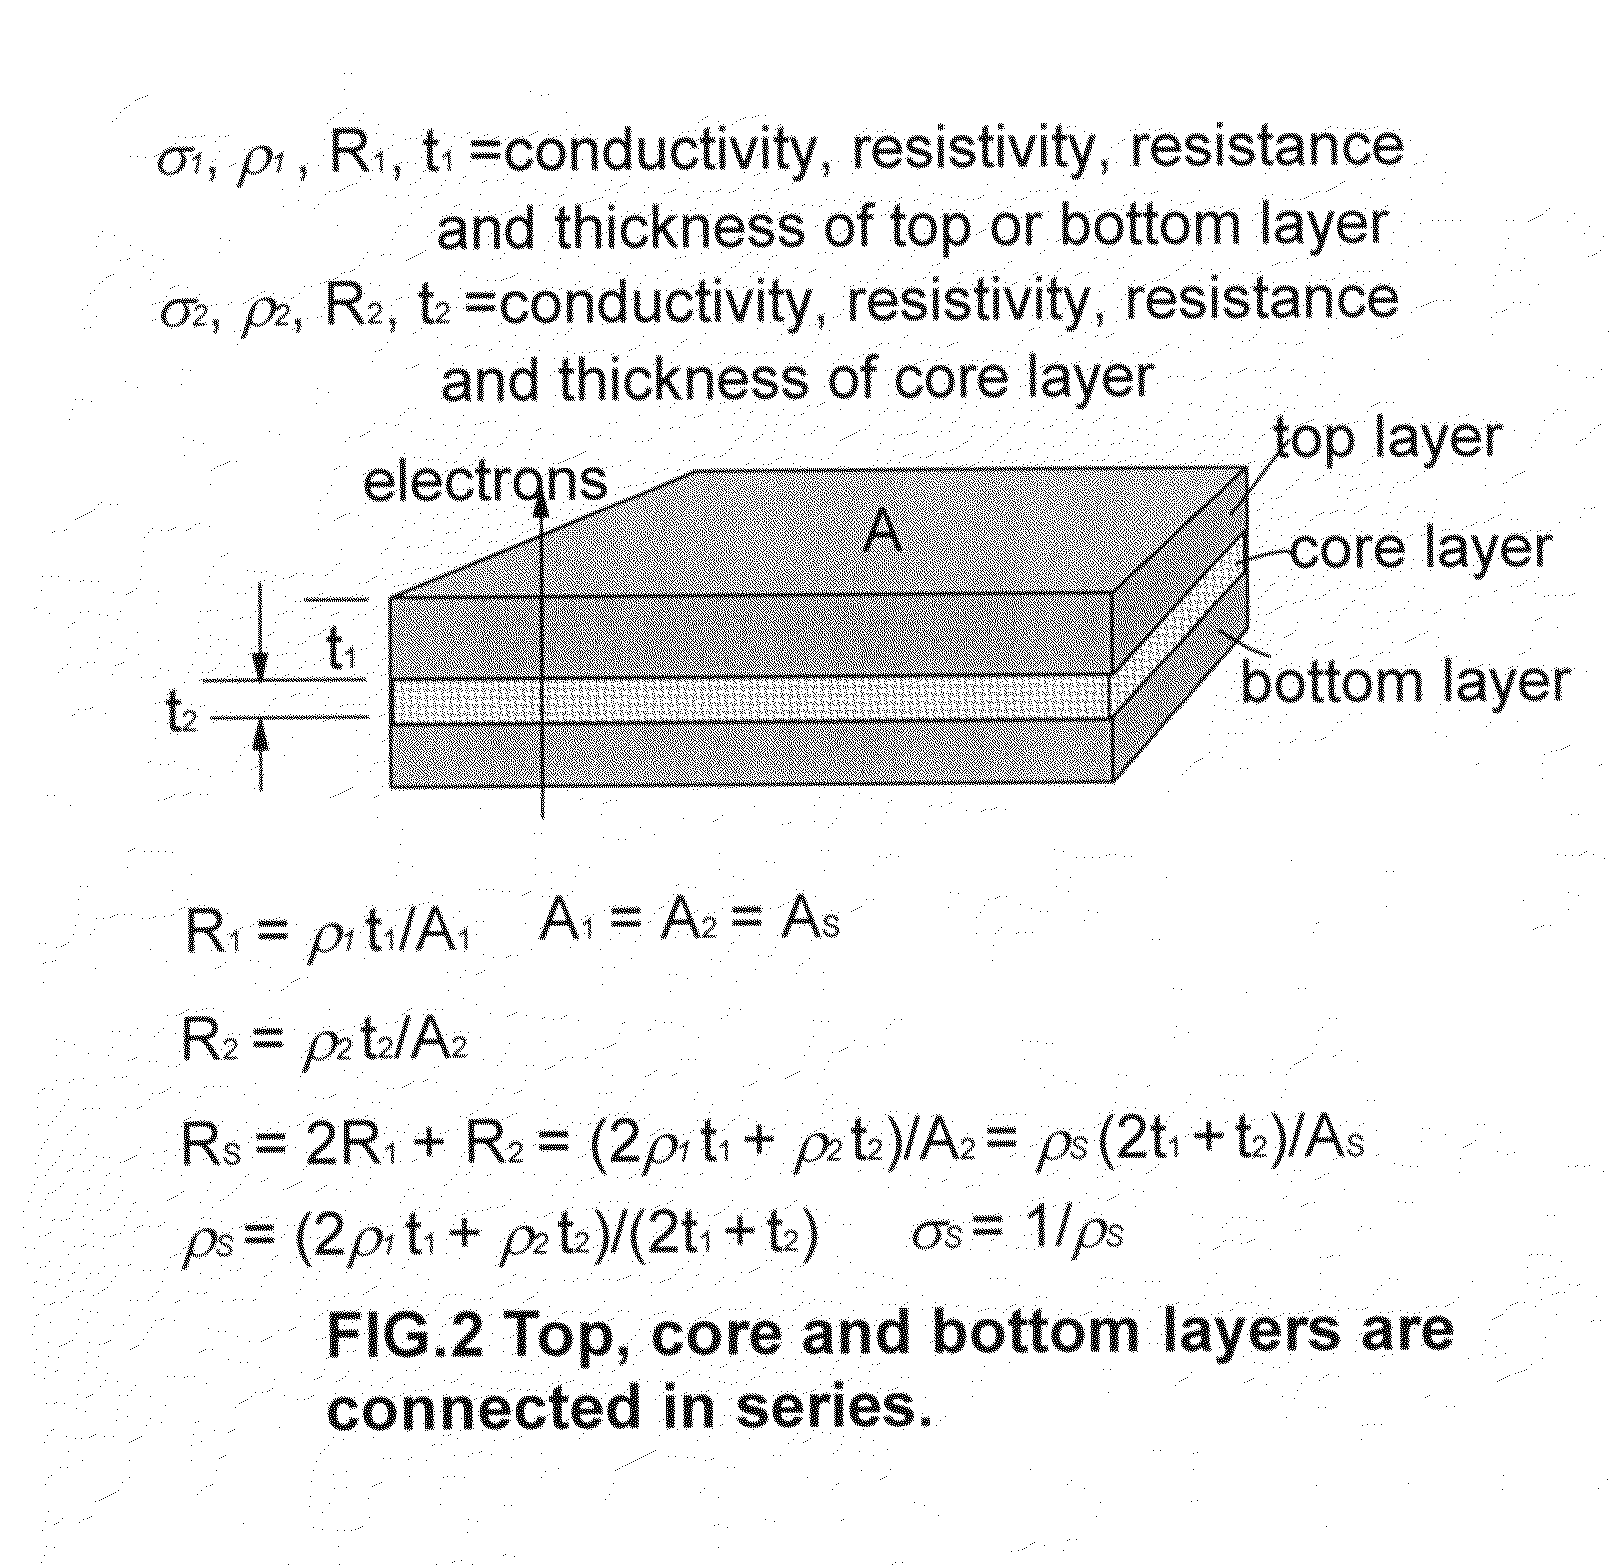 Laminated exfoliated graphite composite-metal compositions for fuel cell flow field plate or bipolar plate applications